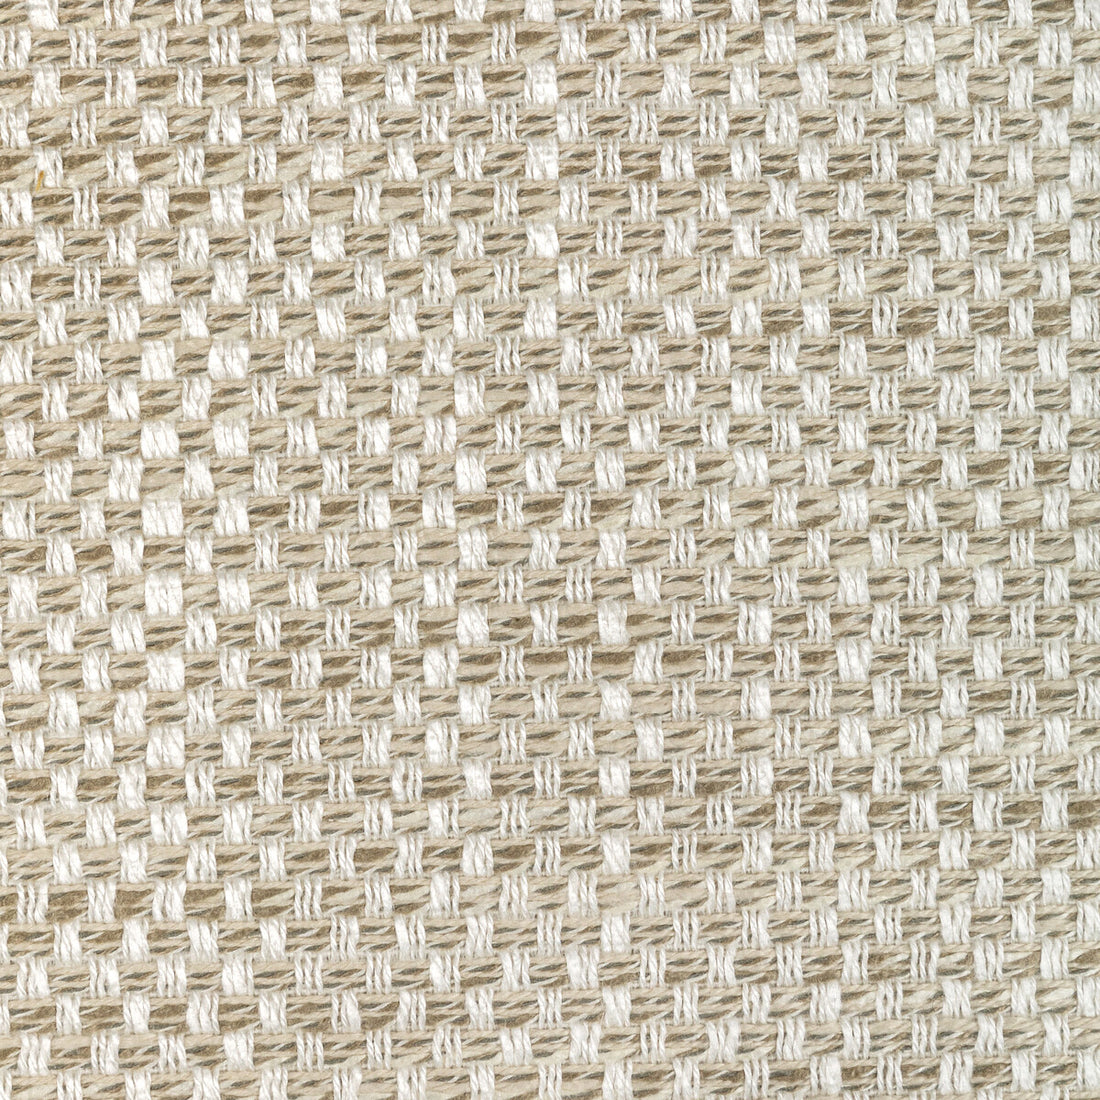 Kravet Design fabric in 36413-161 color - pattern 36413.161.0 - by Kravet Design in the Performance Crypton Home collection